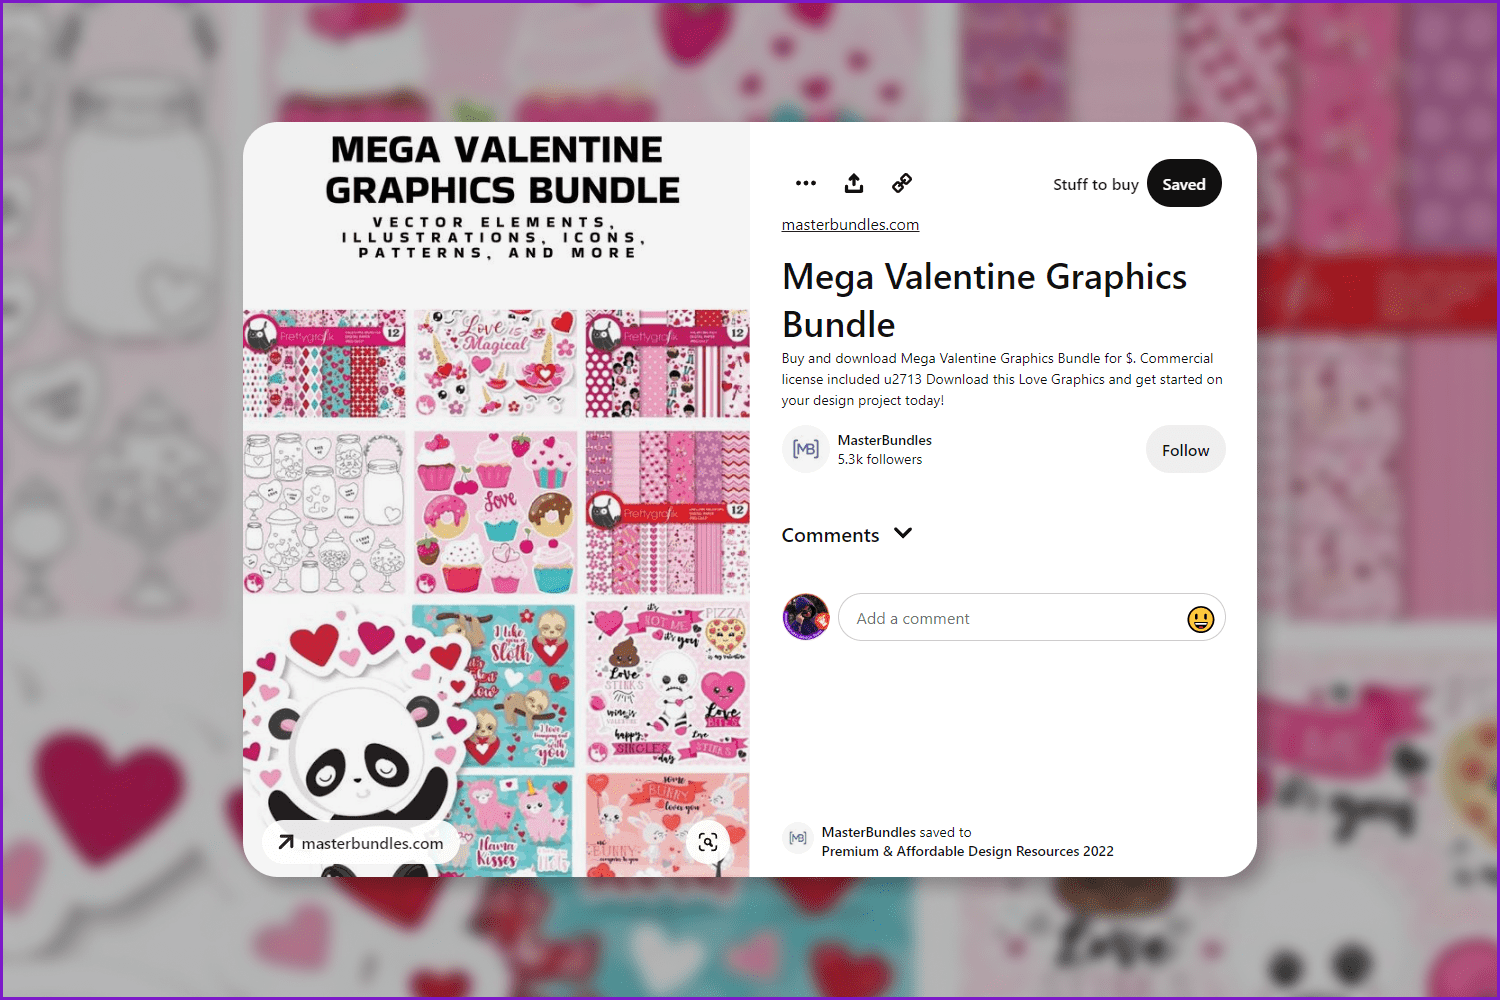 Collage with pink graphic elements and product description on the right.